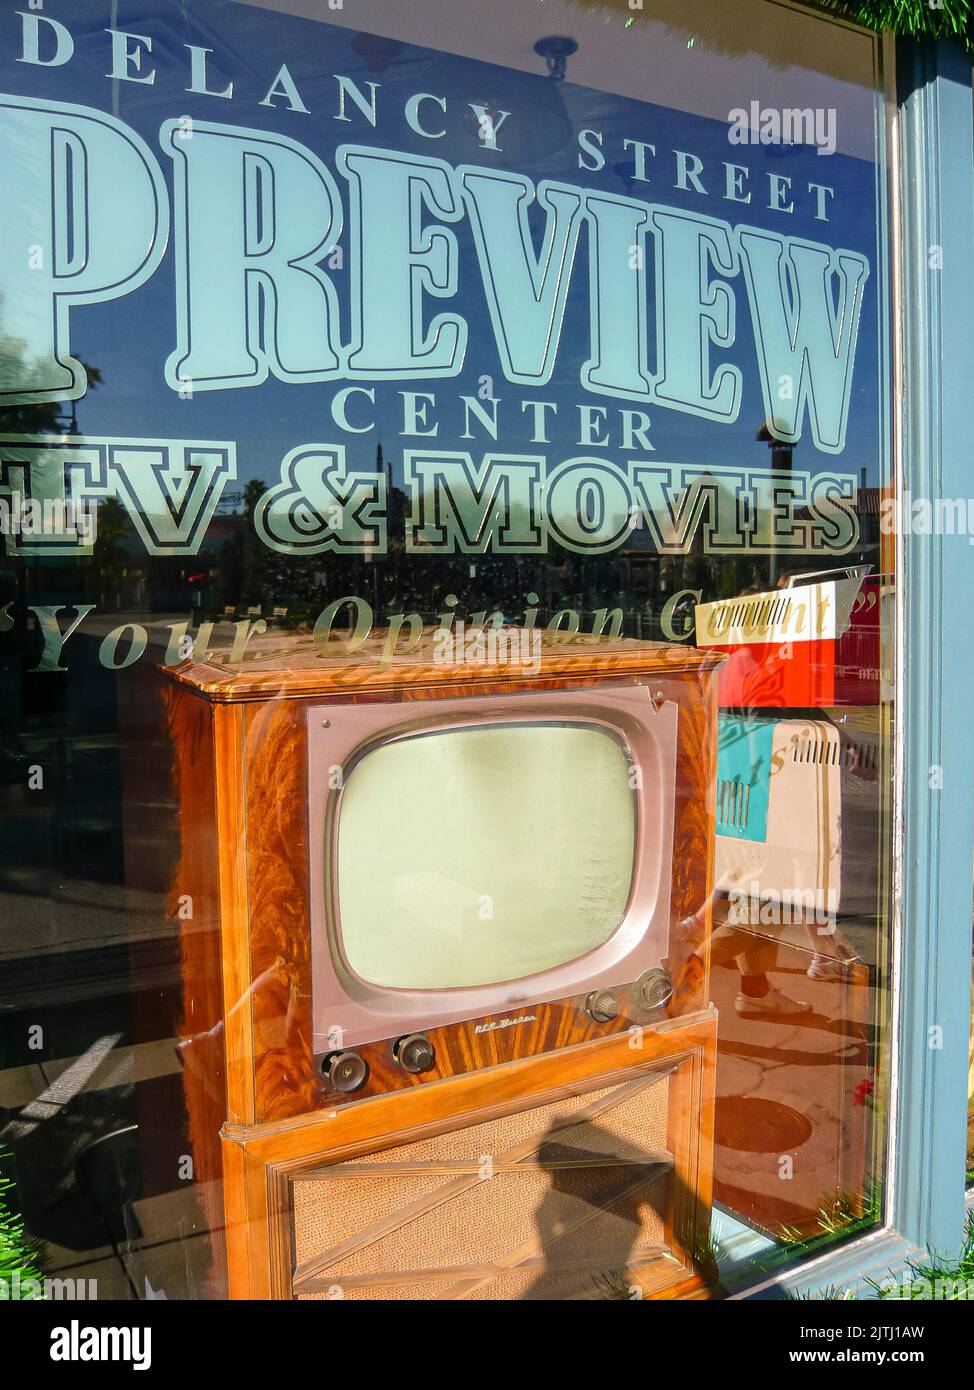 Old fashioned television shop with an old wooden television in the window Stock Photo